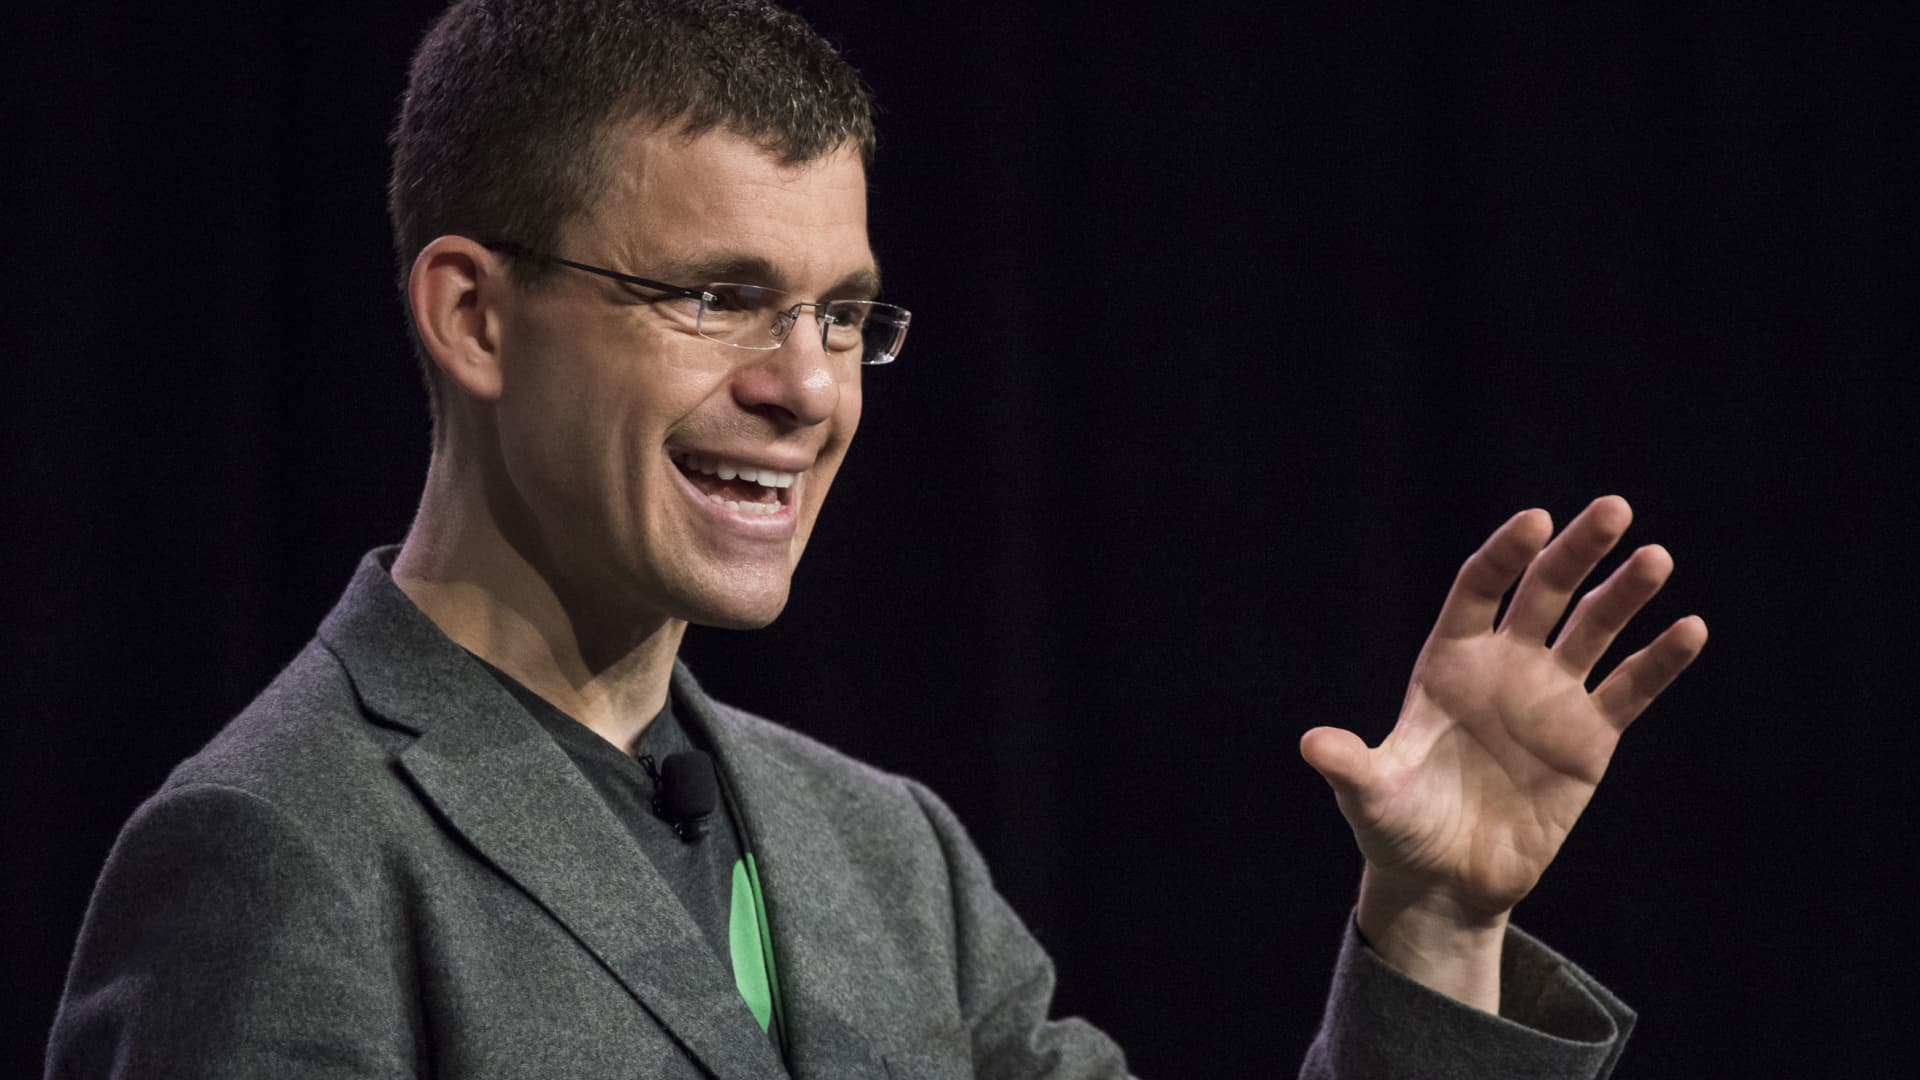 Max Levchin, co-founder of PayPal and Affirm